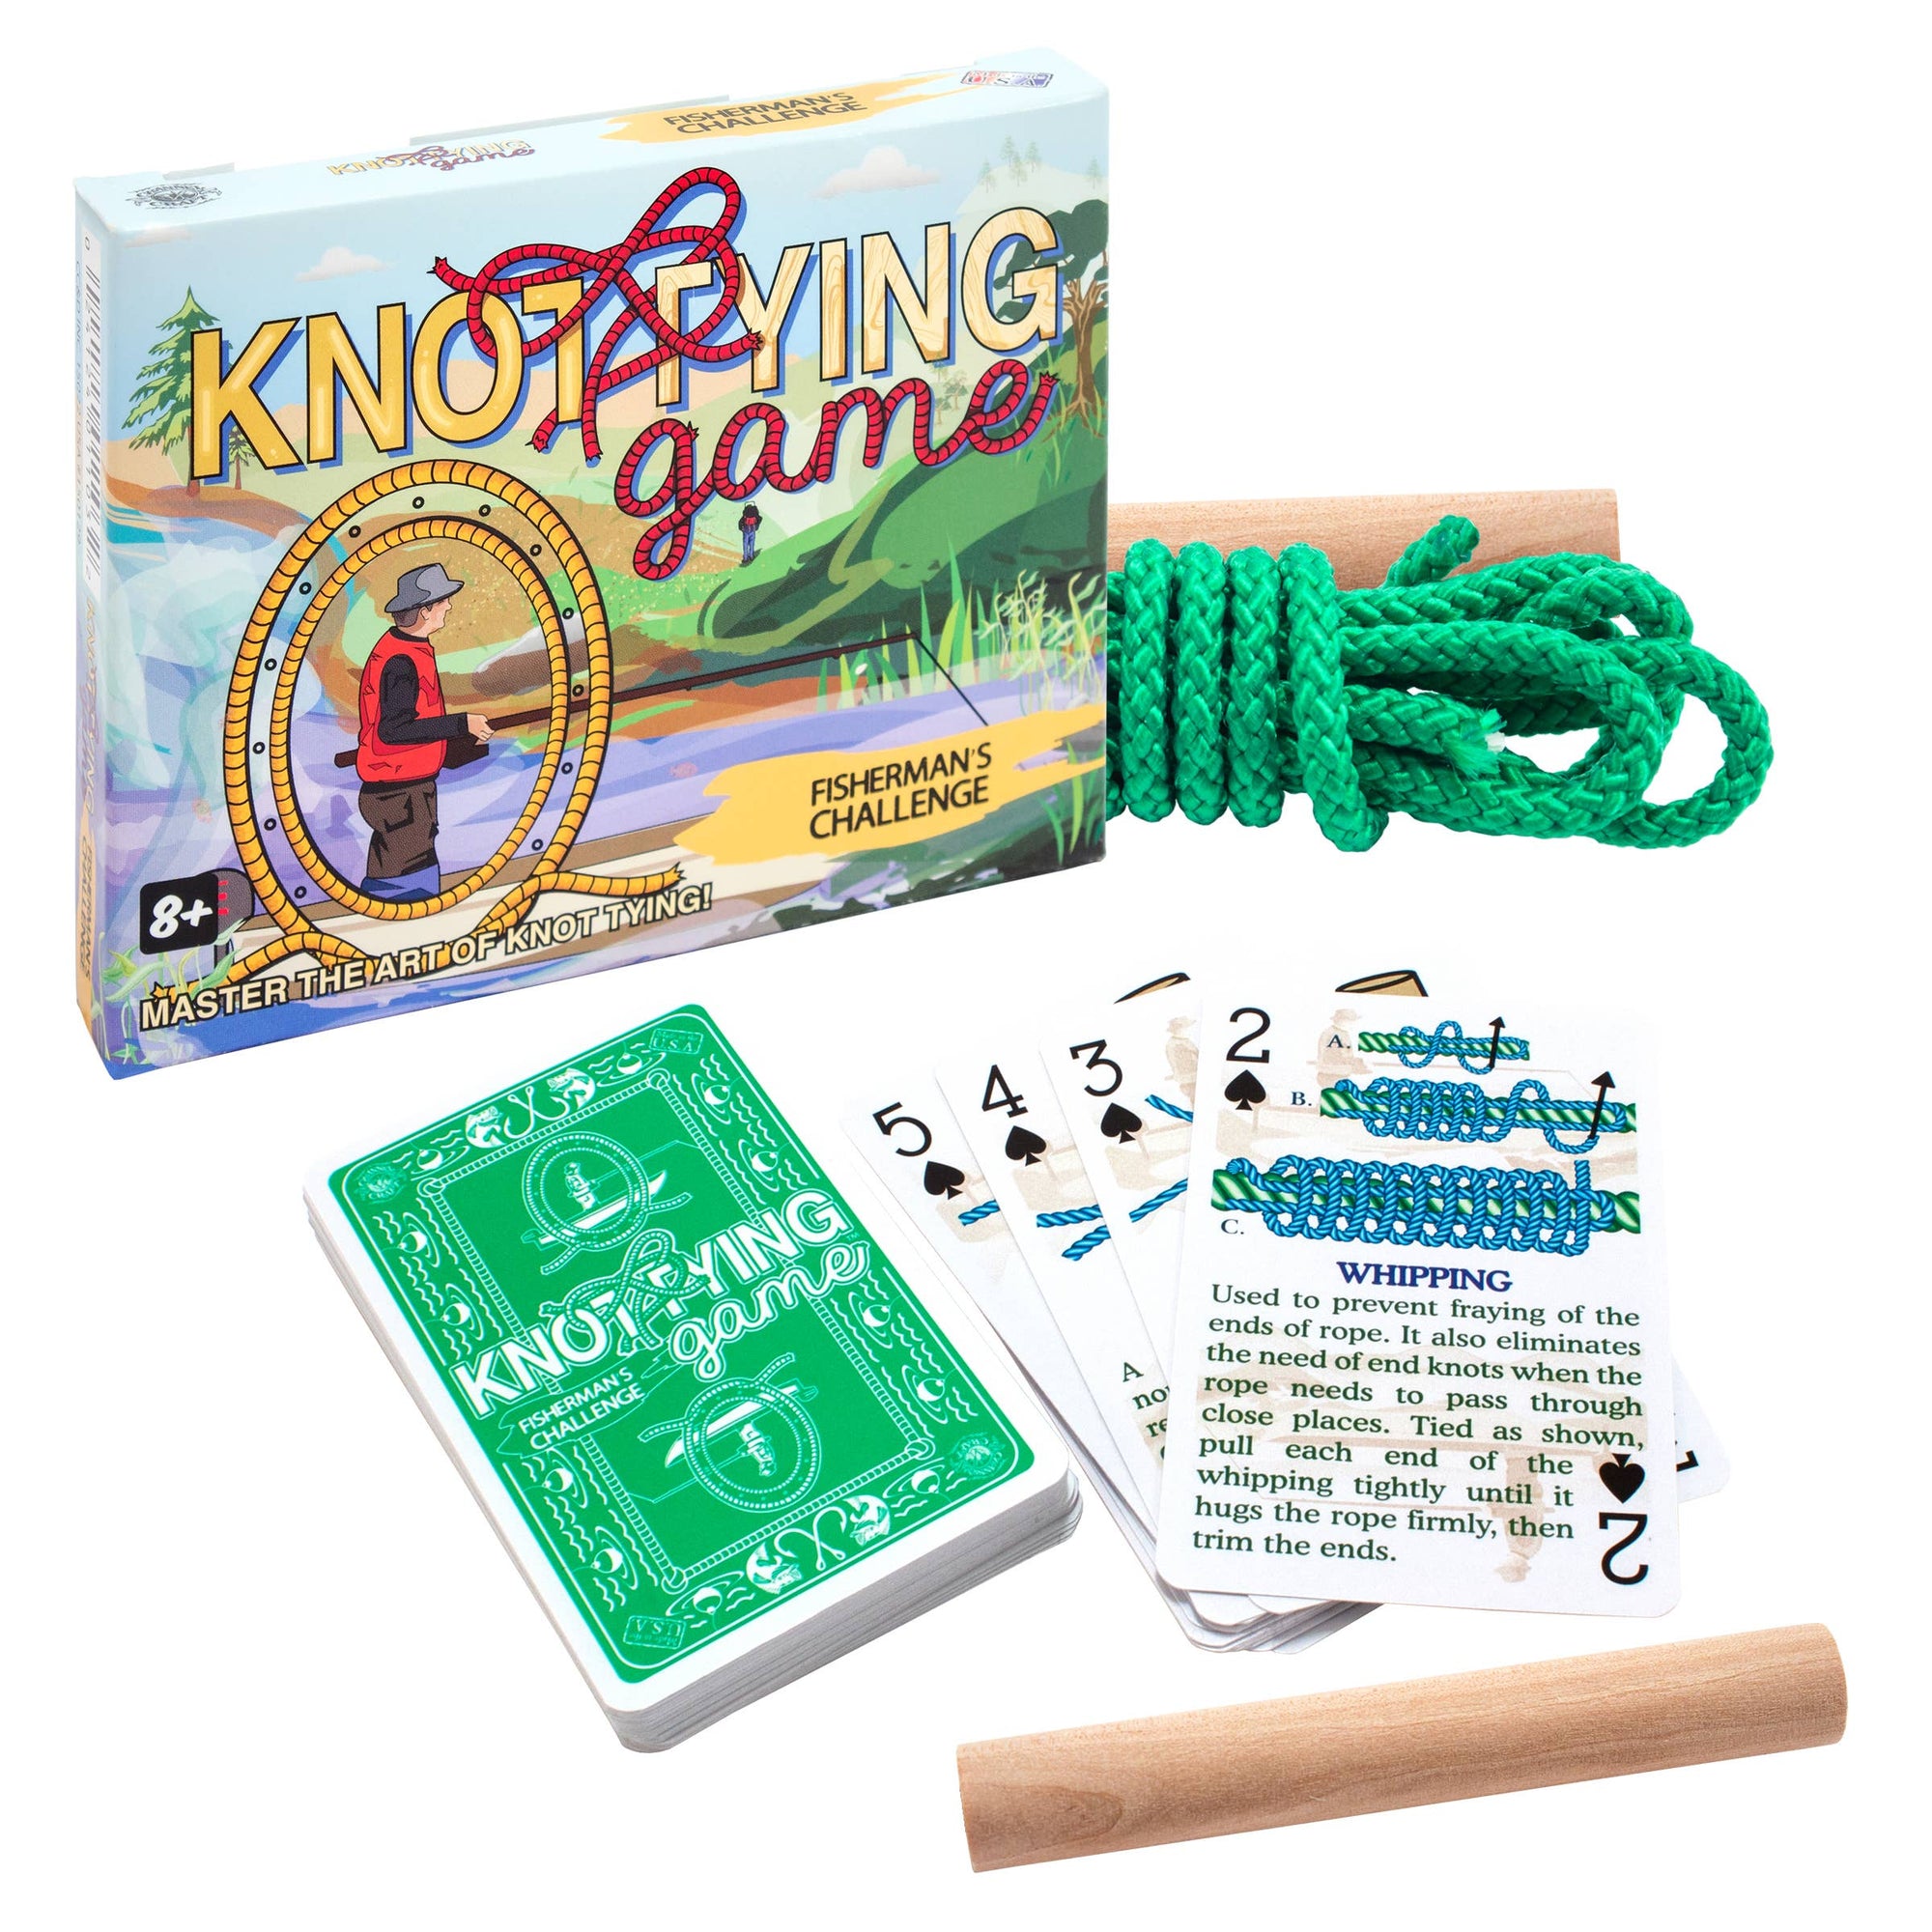 A Knot Tying Kit - Fisherman's Edition designed for outdoor activities, featuring a box, instruction cards, a green rope, and a wooden dowel to teach various knotting techniques.